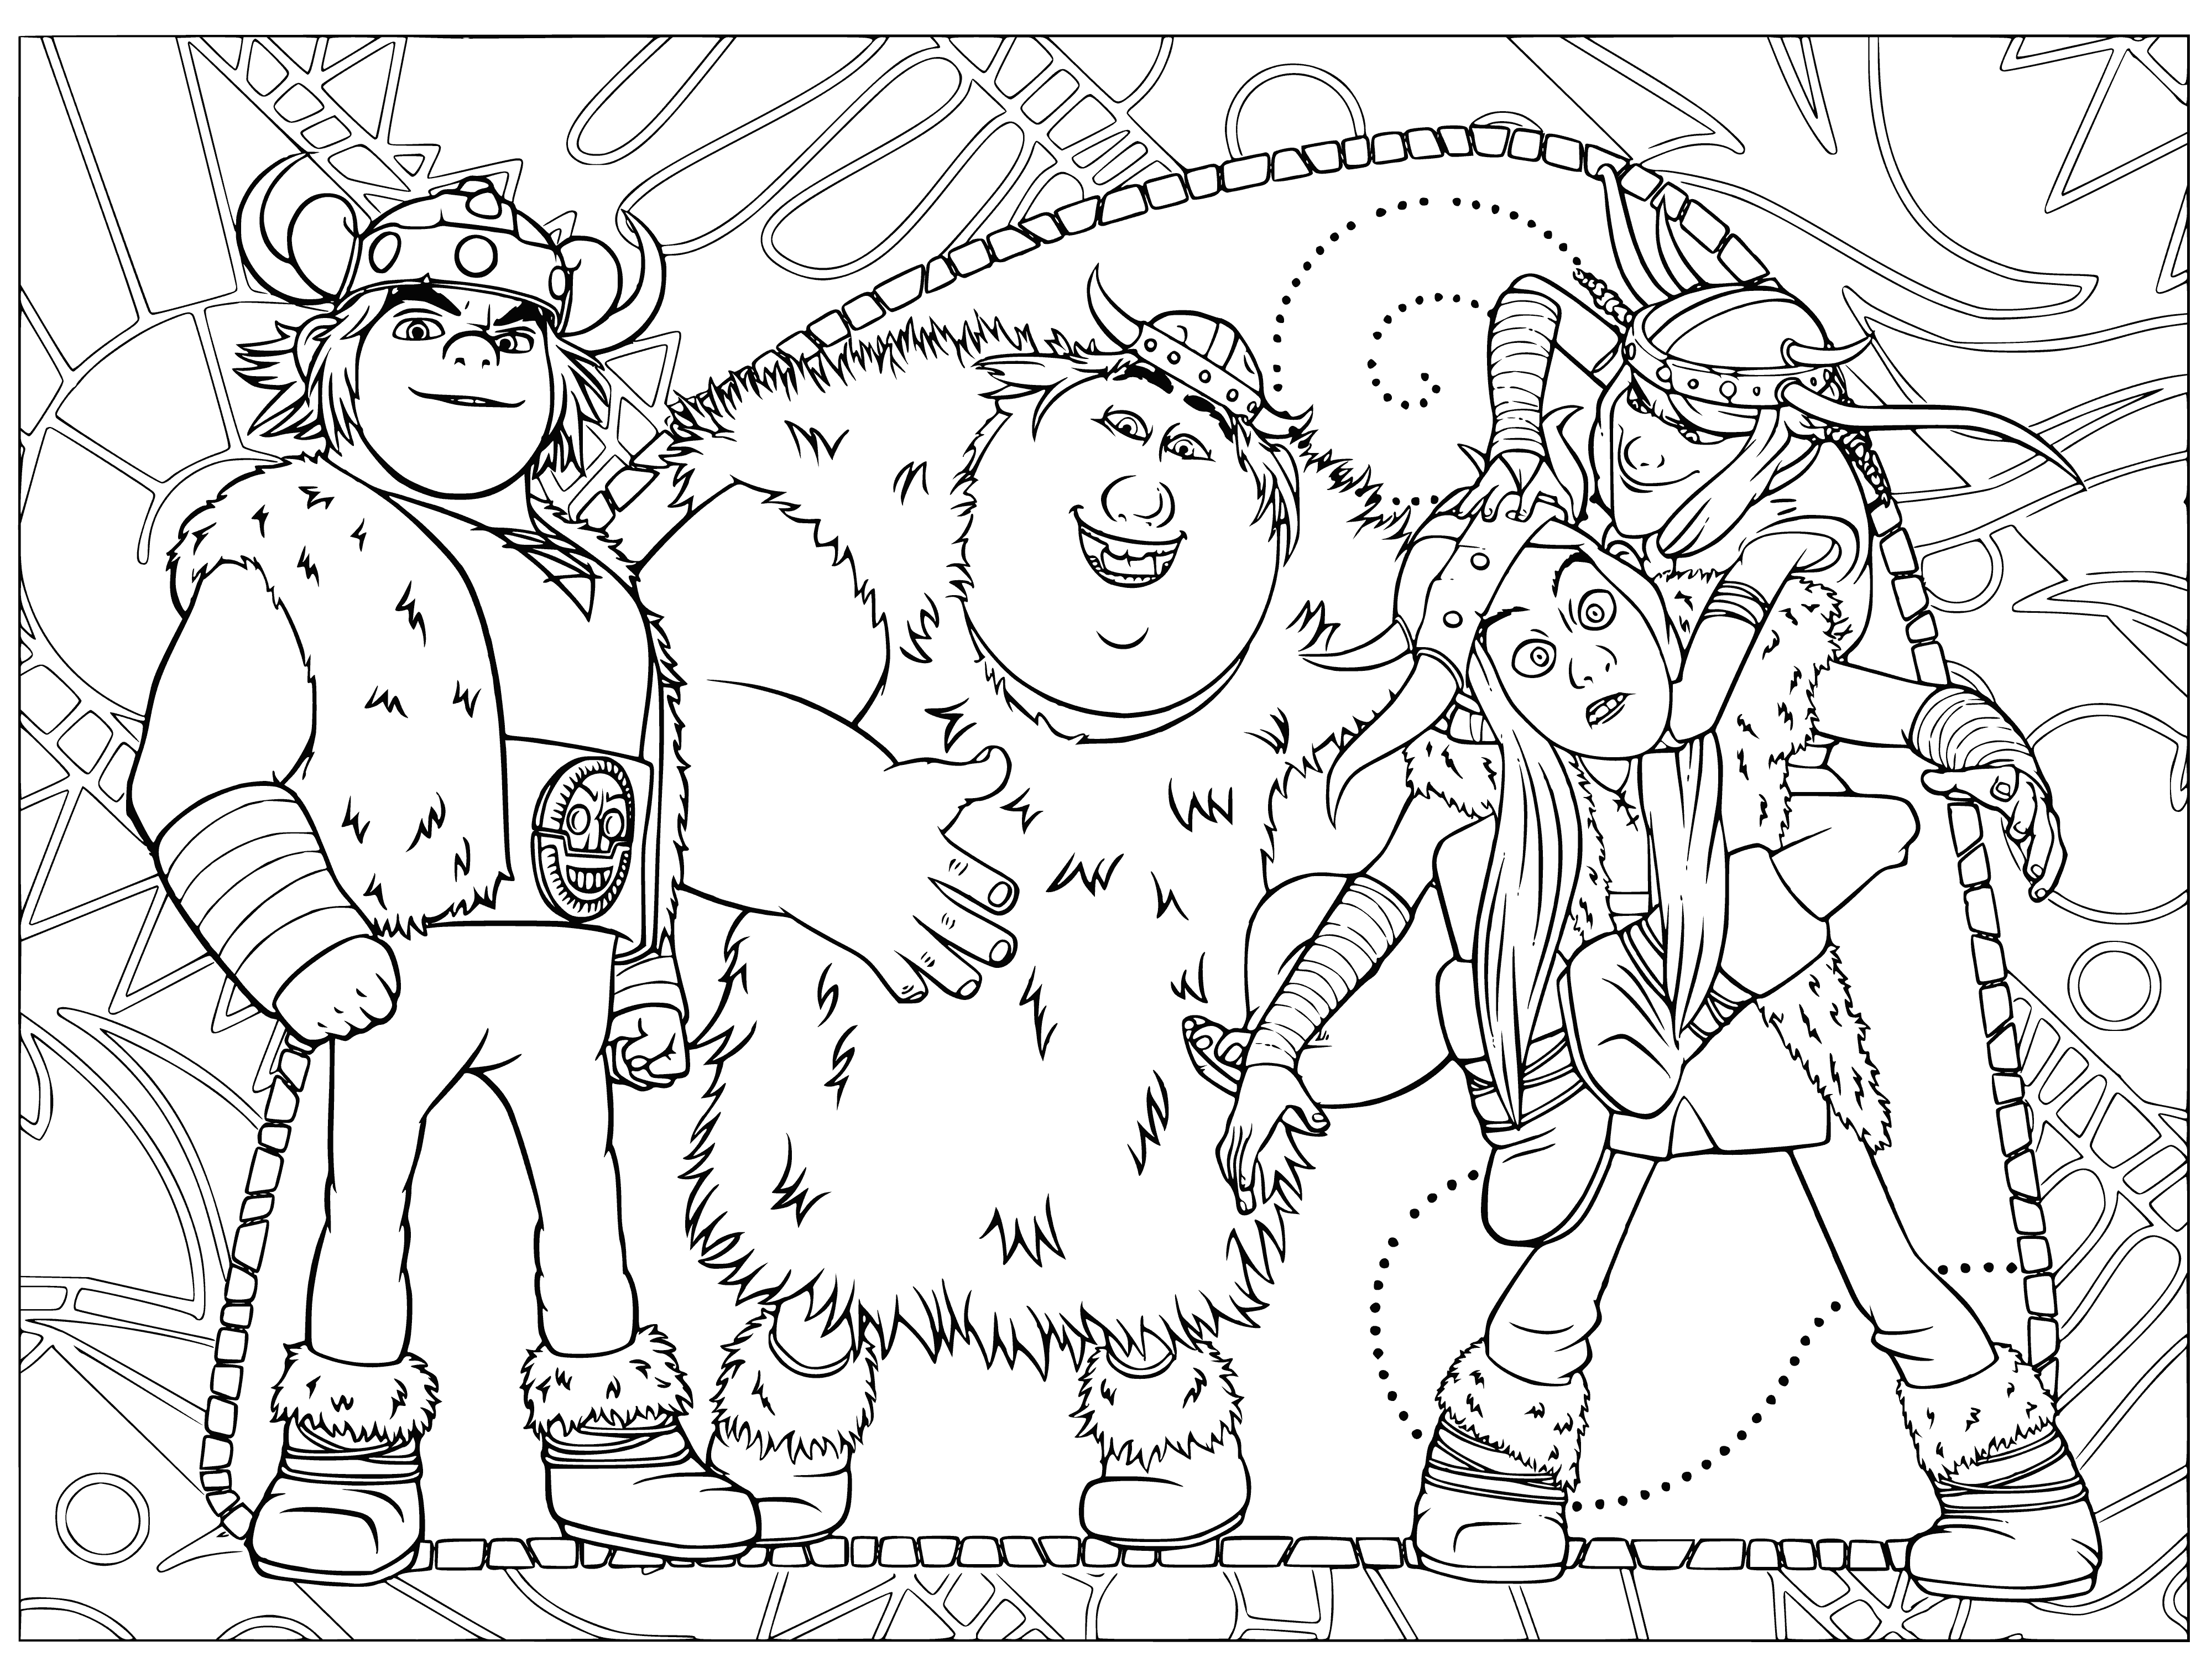 Hiccup's friends coloring page